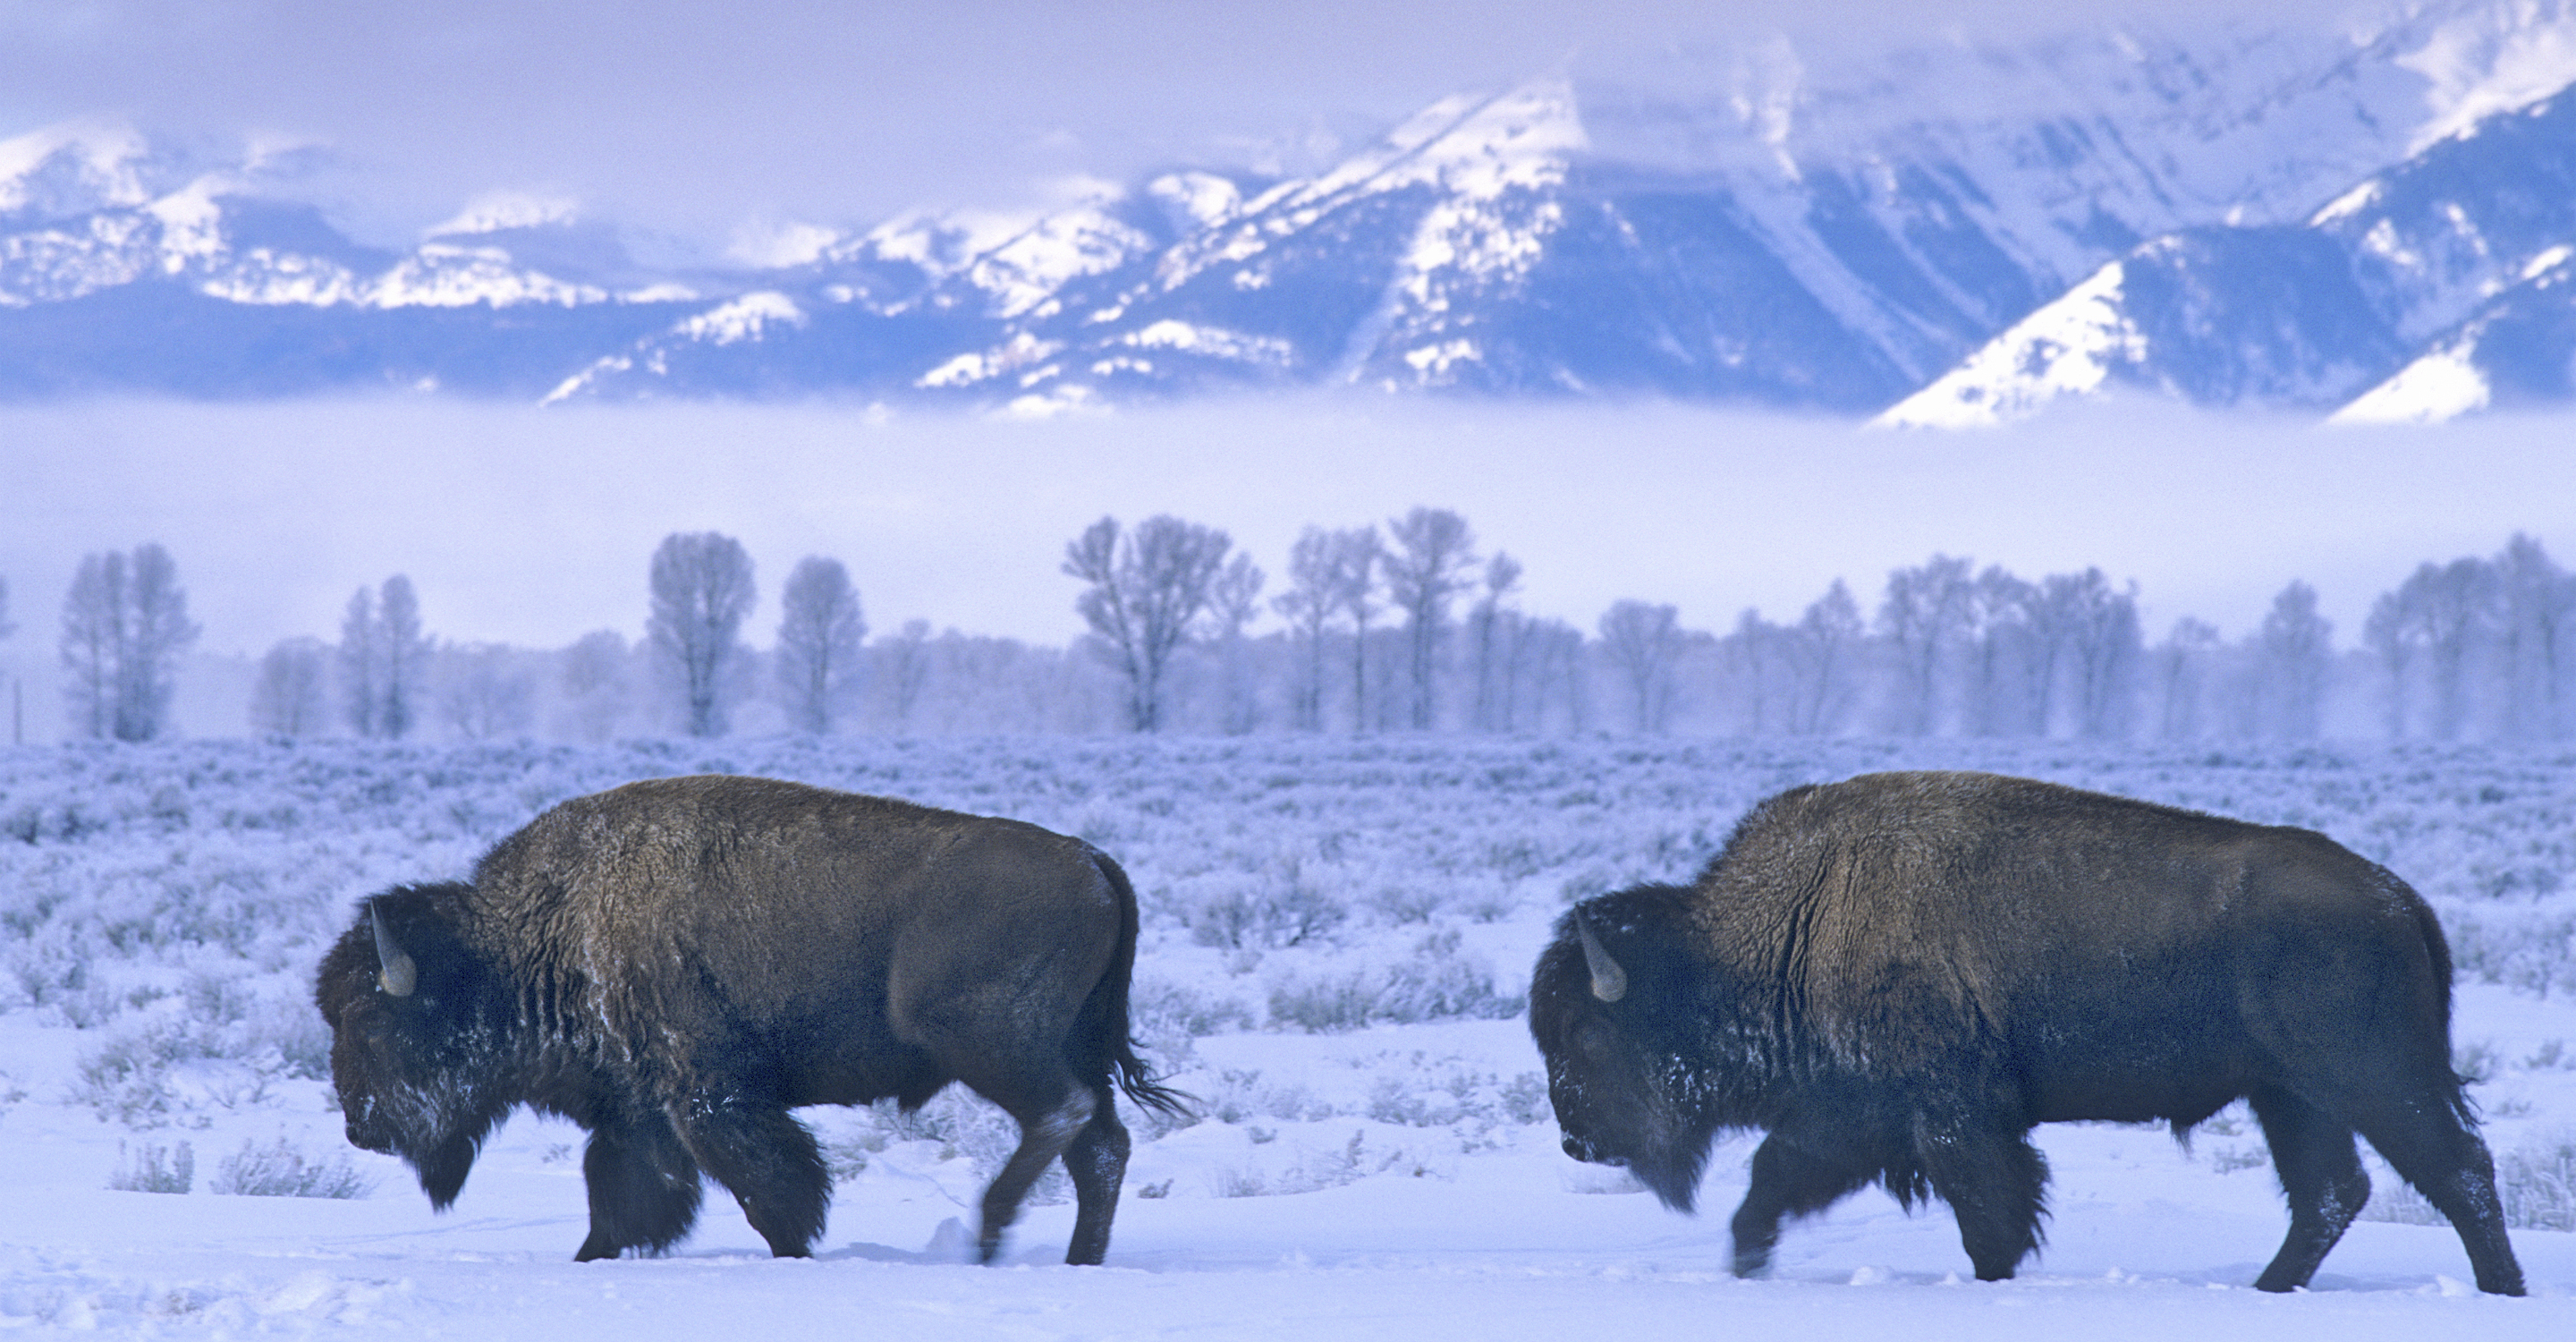 Two American bison walk in the snowy landscape of Grand Teton National Park, United States